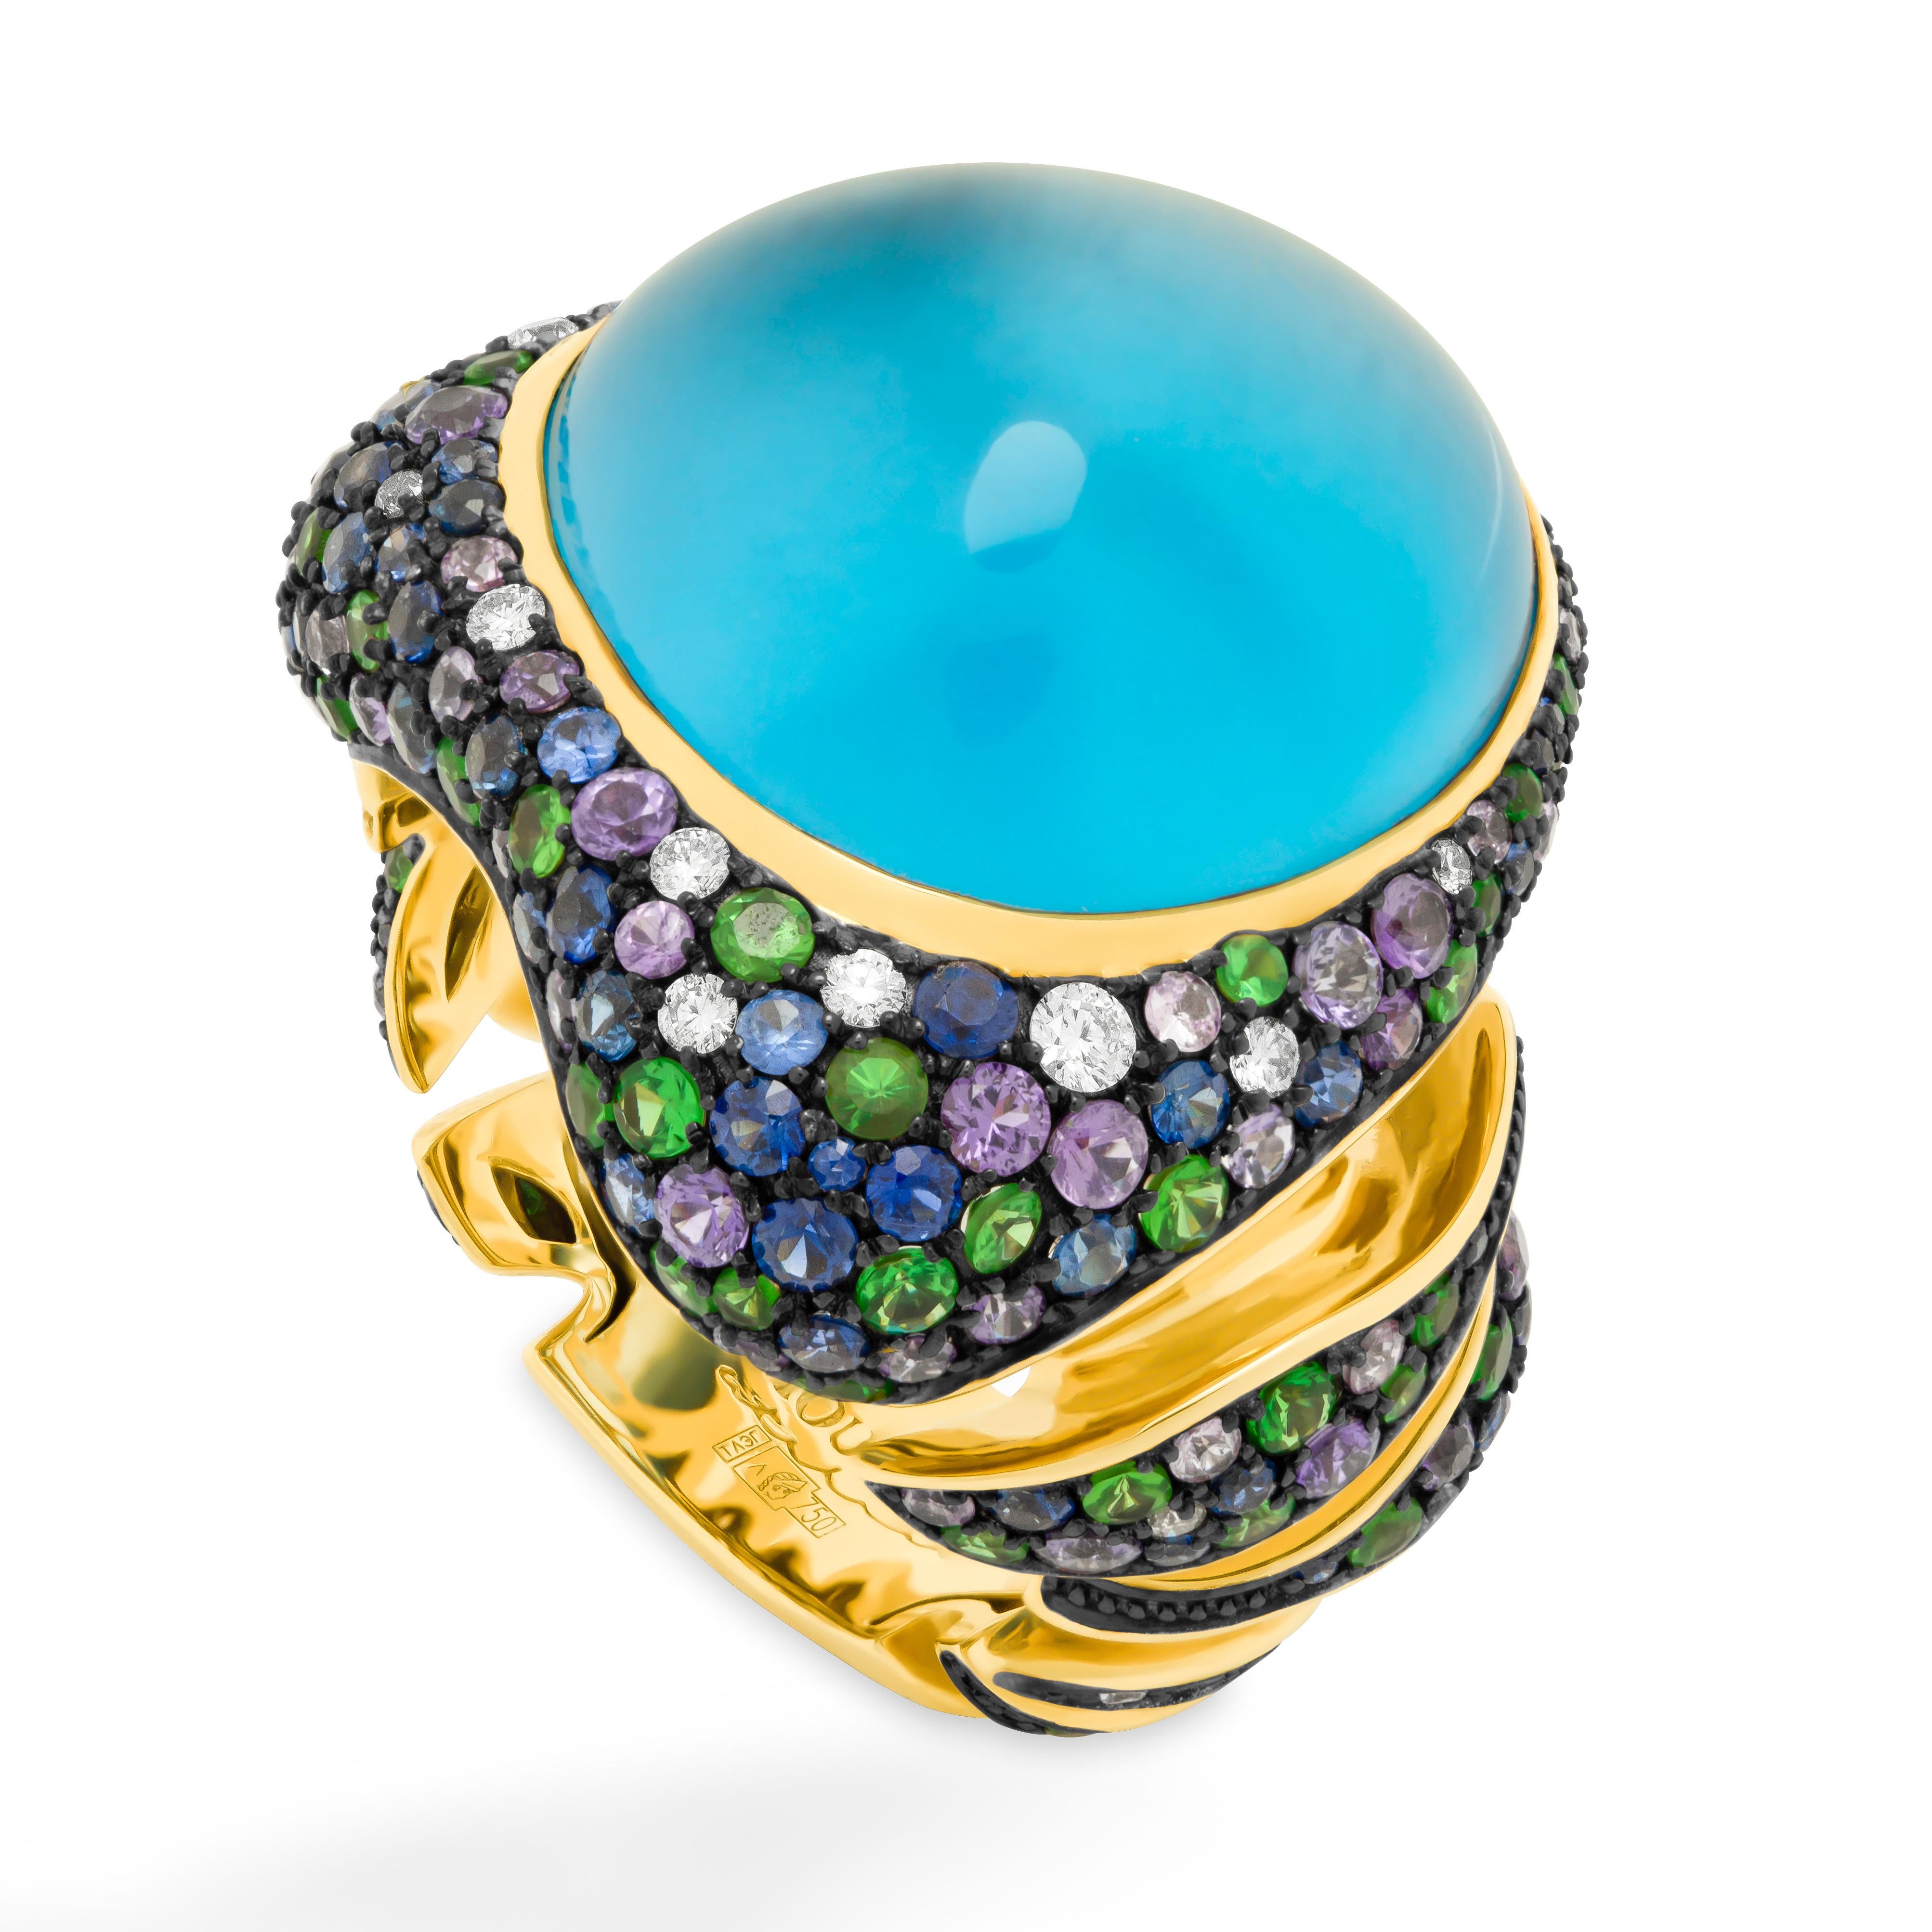 Swiss Topaz 25.86 Carat Diamonds Tsavorites Sapphires 18 Karat Yellow Gold Ring
All the colors of hot summer are collected in our Ring. Bright 60 tsavorites, 54 Purple, and 86 Blue Sapphires weighing total 1.80 Carat, 22 Diamonds, and a mixture of